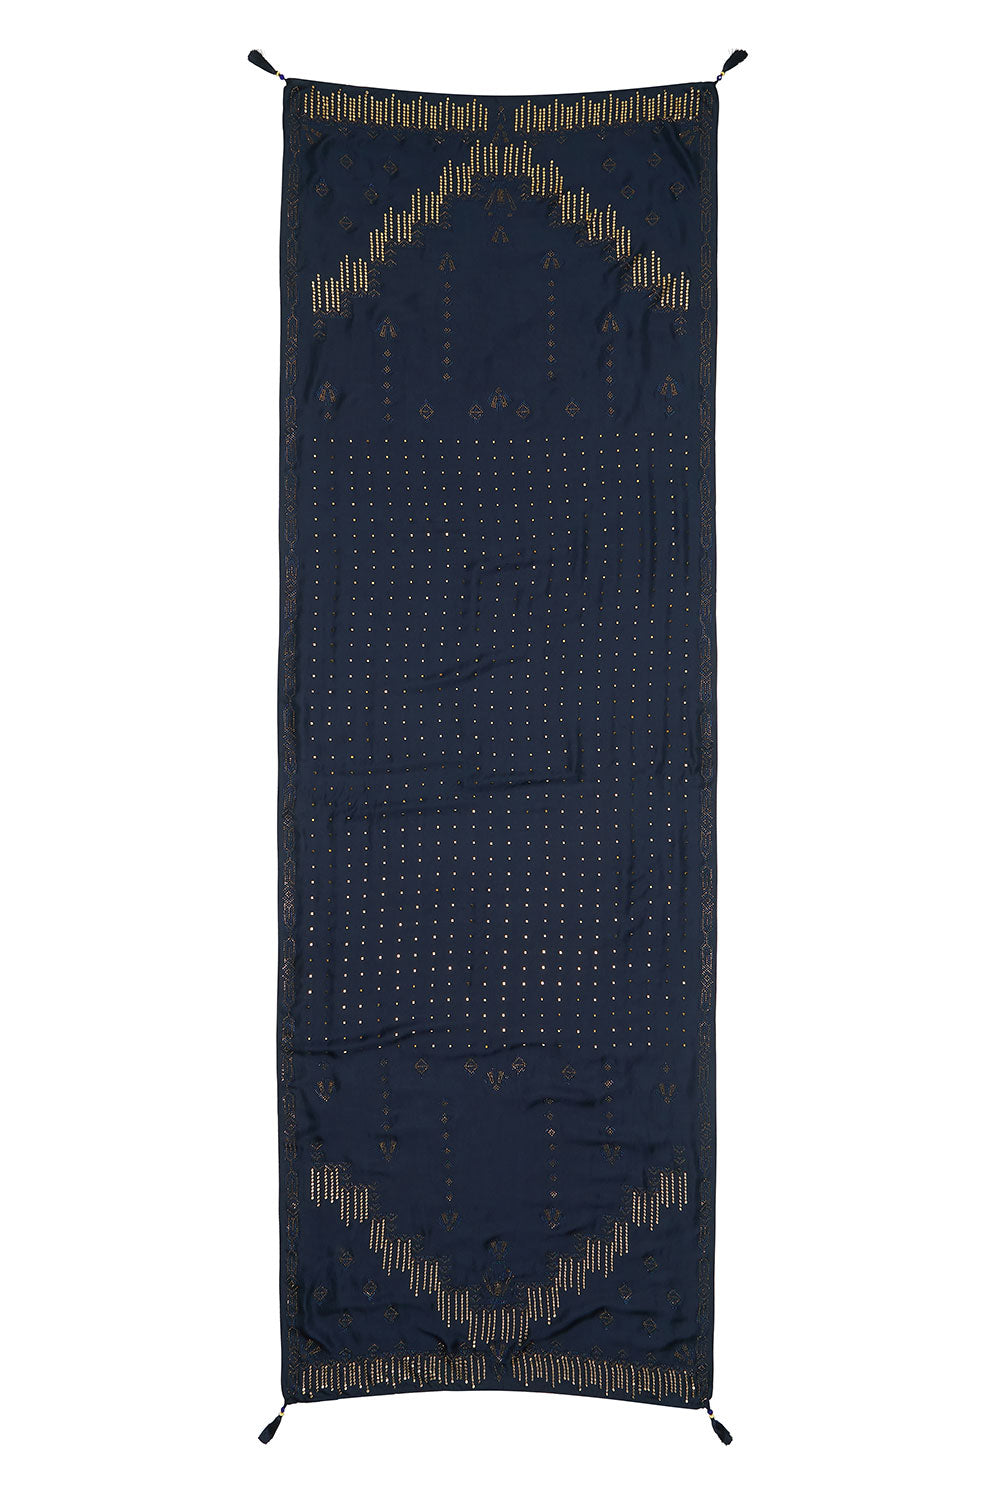 WIDE SCARF WITH TASSEL LUXE NAVY